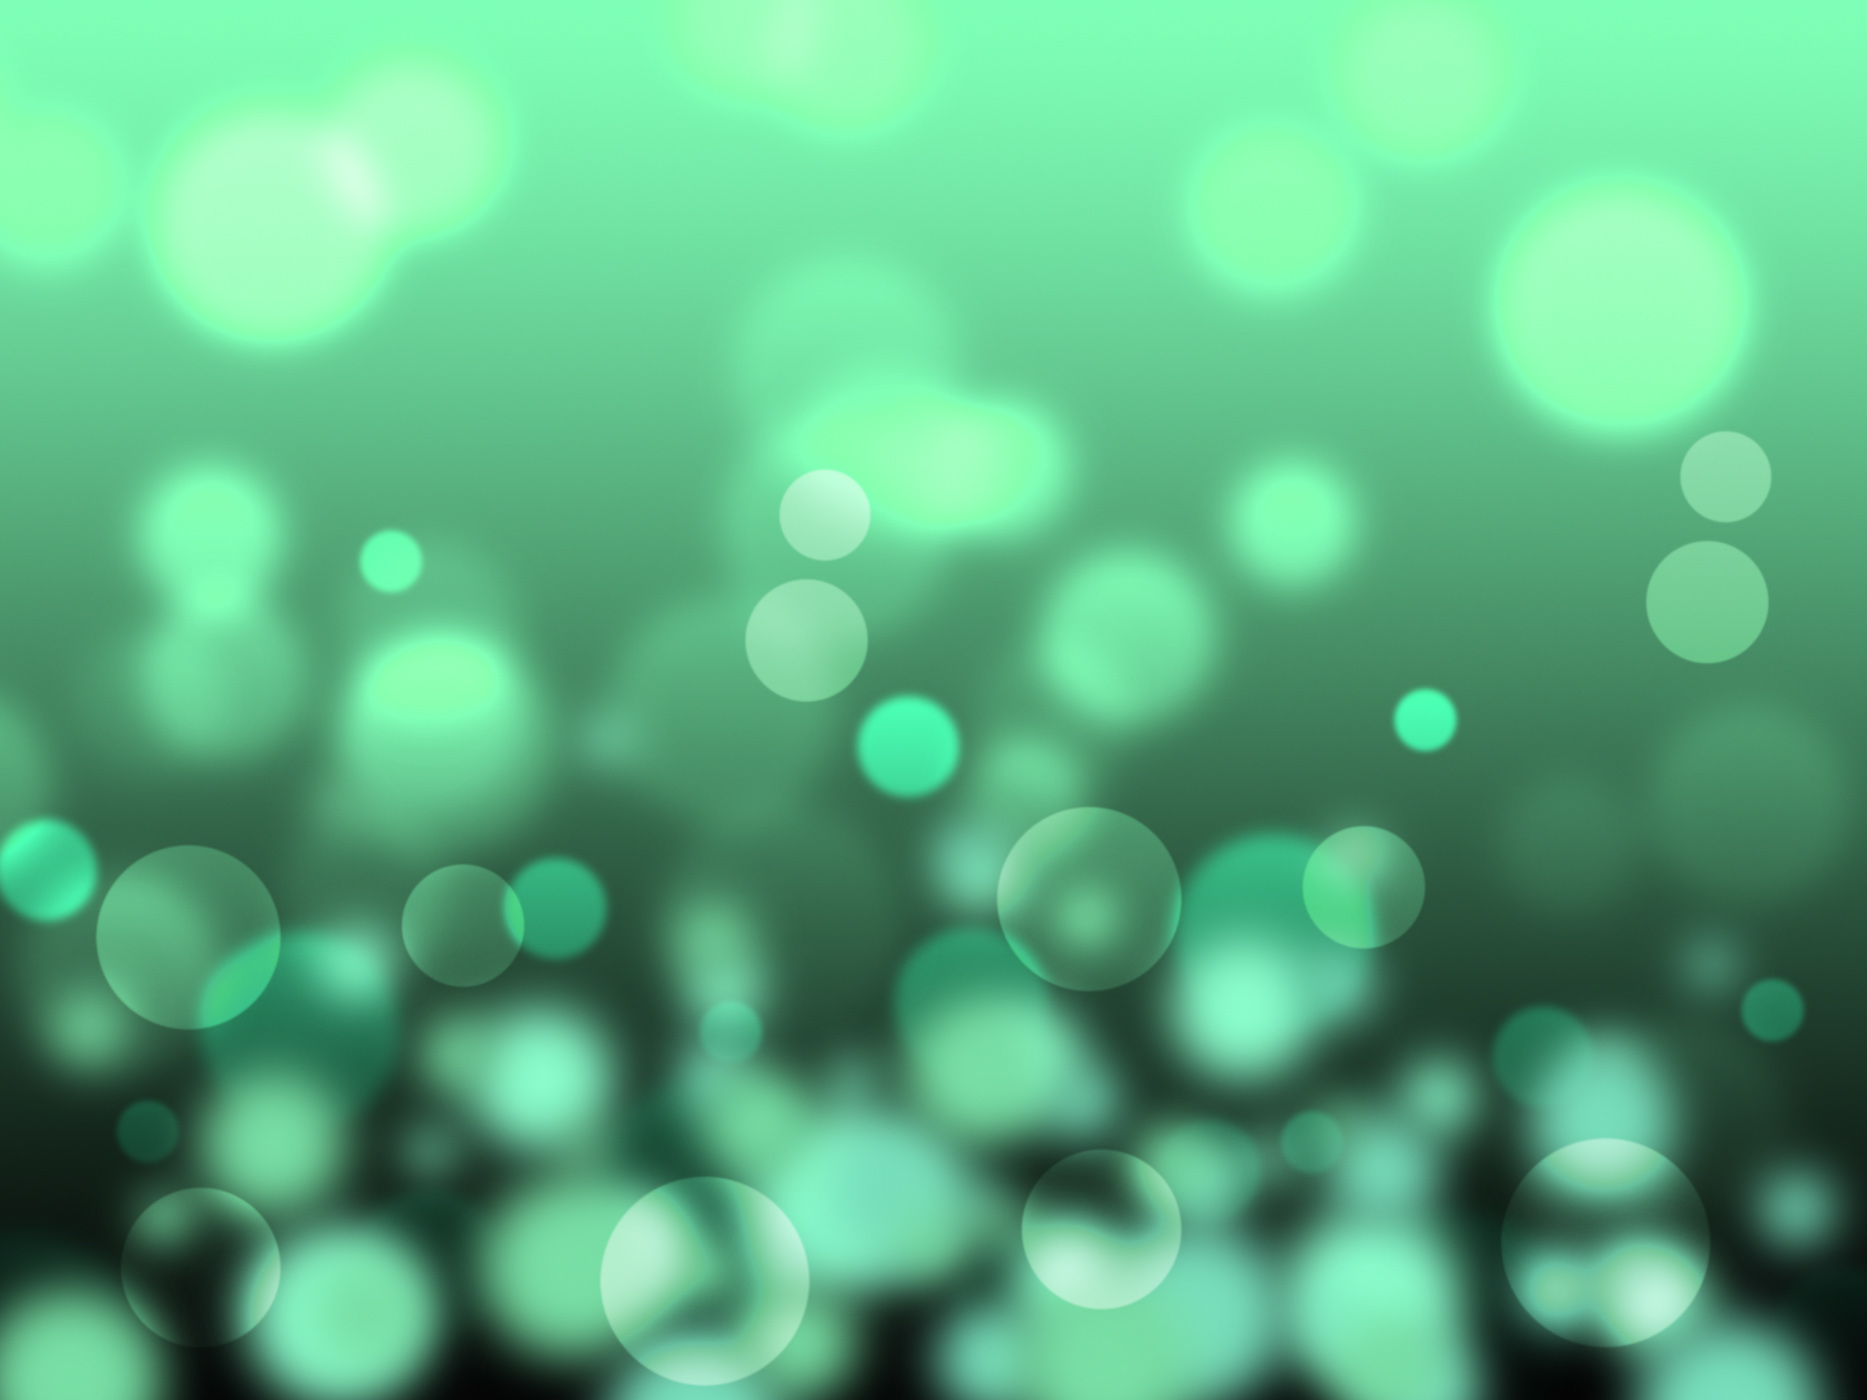 Green background means bokeh lights and abstract photo